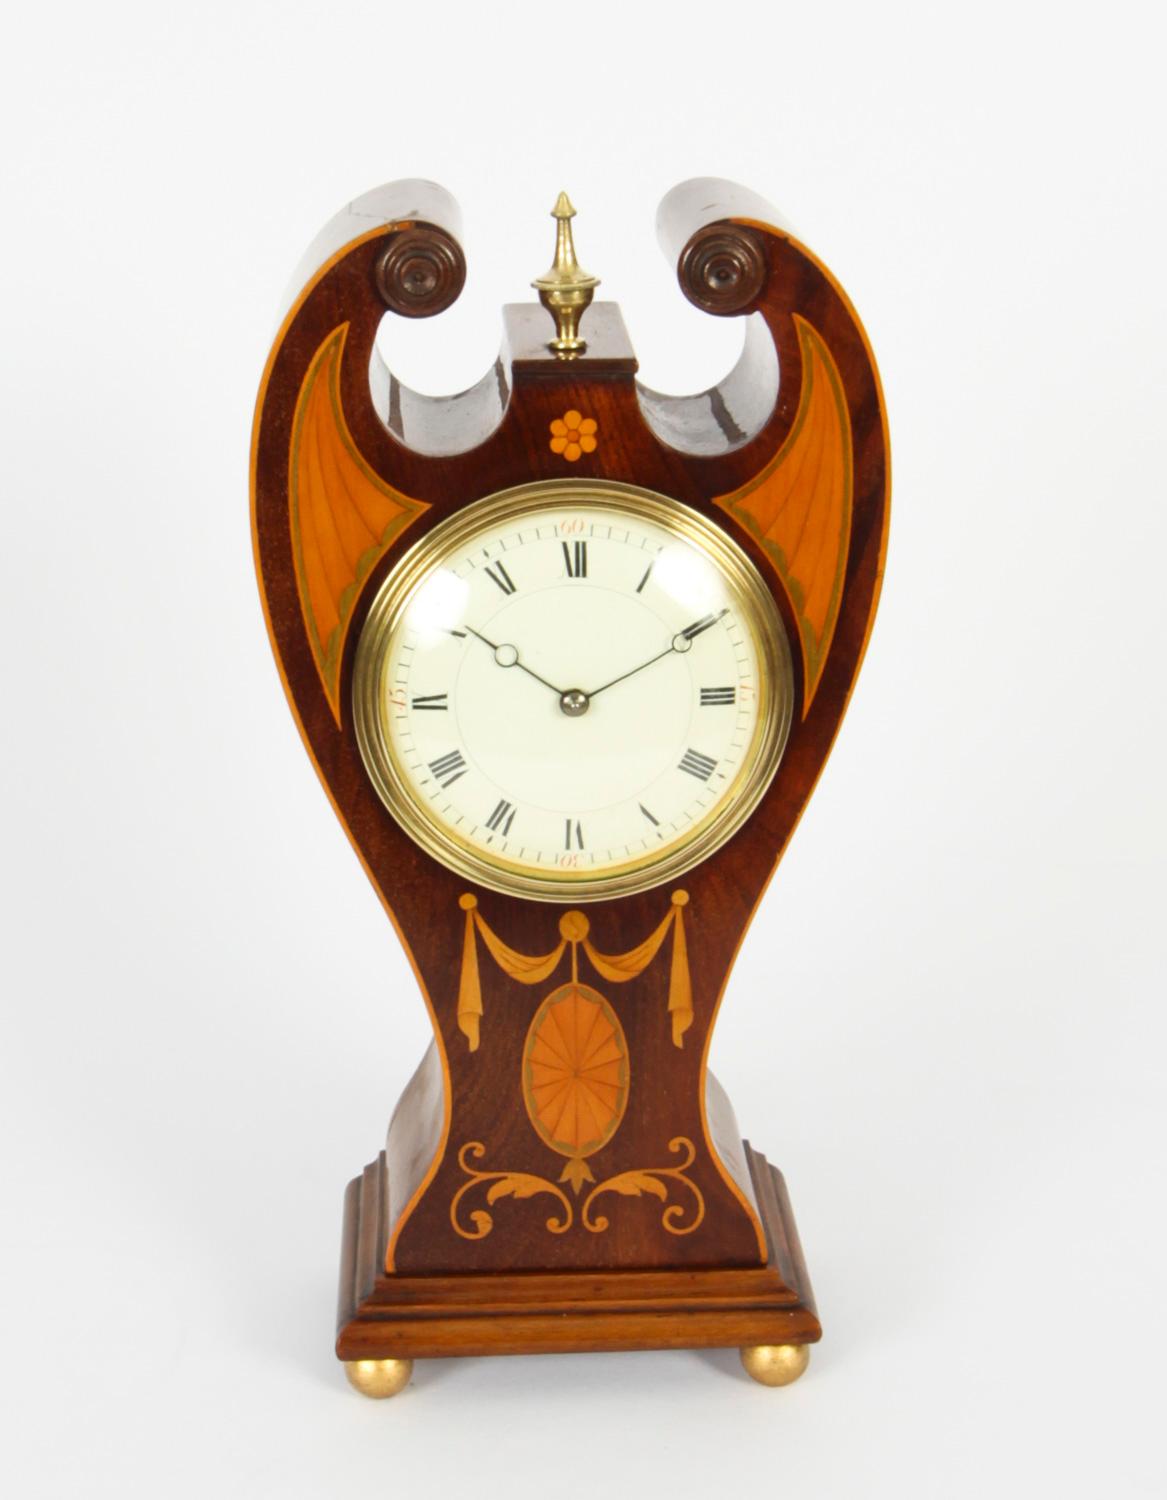 This is a pretty antique Edwardian inlaid mahogany mantel clock, circa 1900 in date, complete with the original winding key.

It has a beautiful beautiful shaped case with string inlay, ribbon and garland, with enamelled dial and eight day movement,